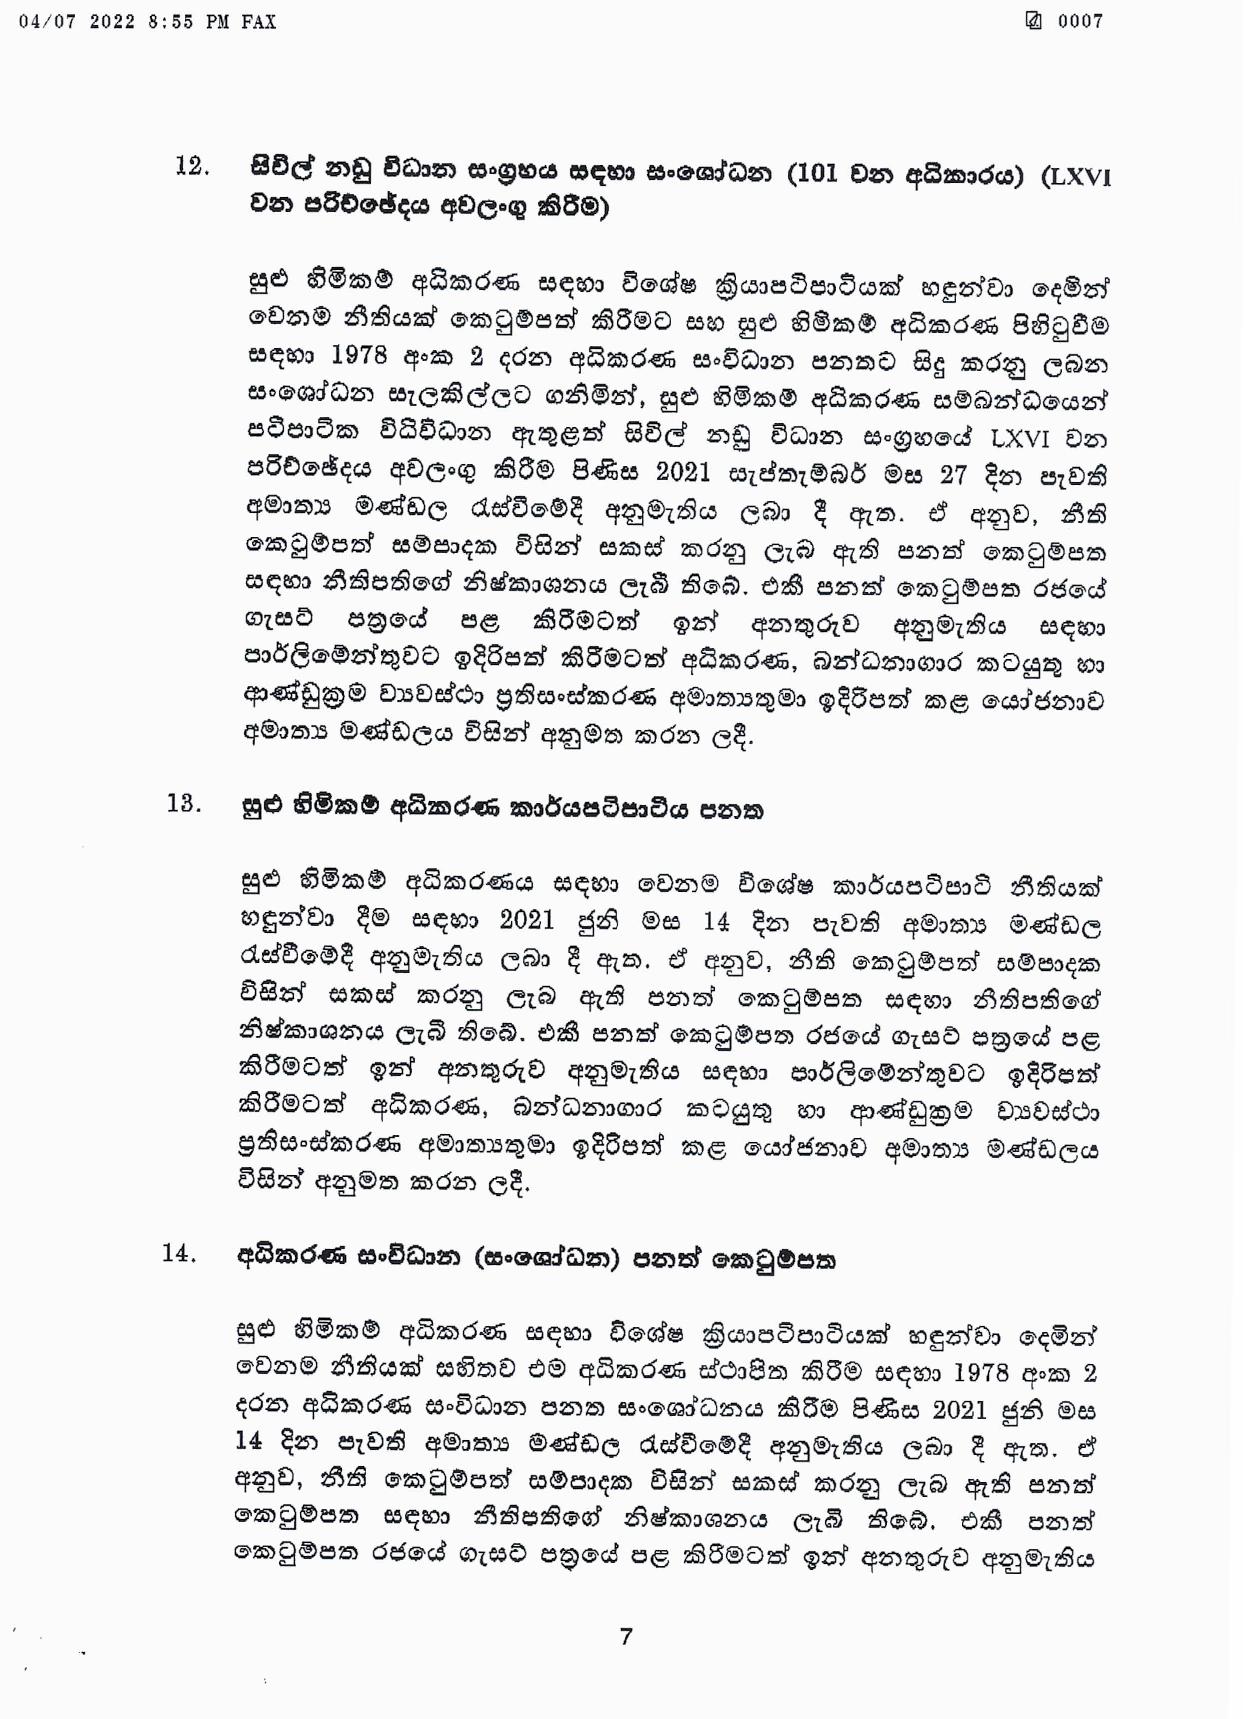 Cabinet Decision on 04.07.2022 page 007